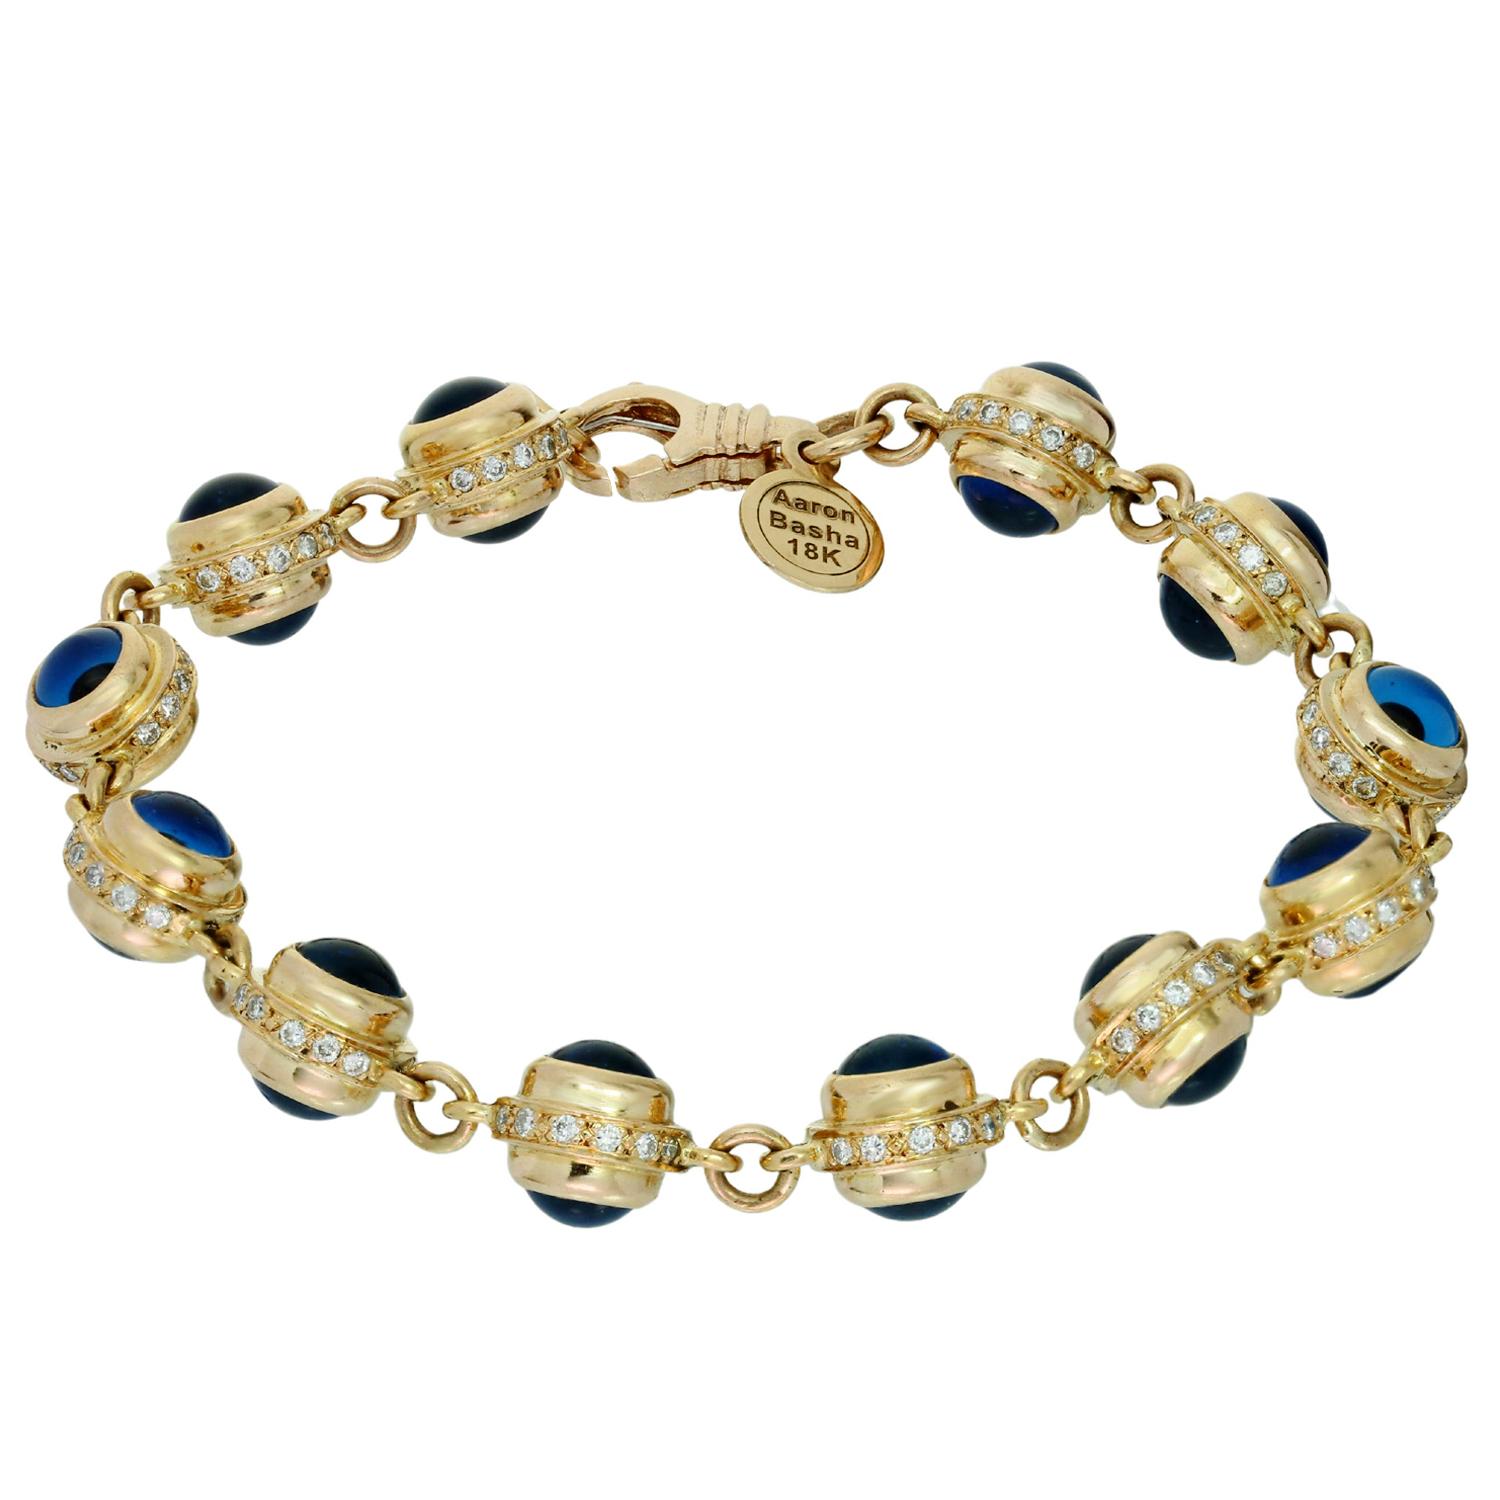 This fabulous Aaron Basha link bracelet is crafted in 18k rose gold and features evil eye beads accented with round brilliant E-F-G VVS1-VVS2 diamonds weighing an estimated 1.40 carats. Made in United States circa 2010s. Measurements: 0.35